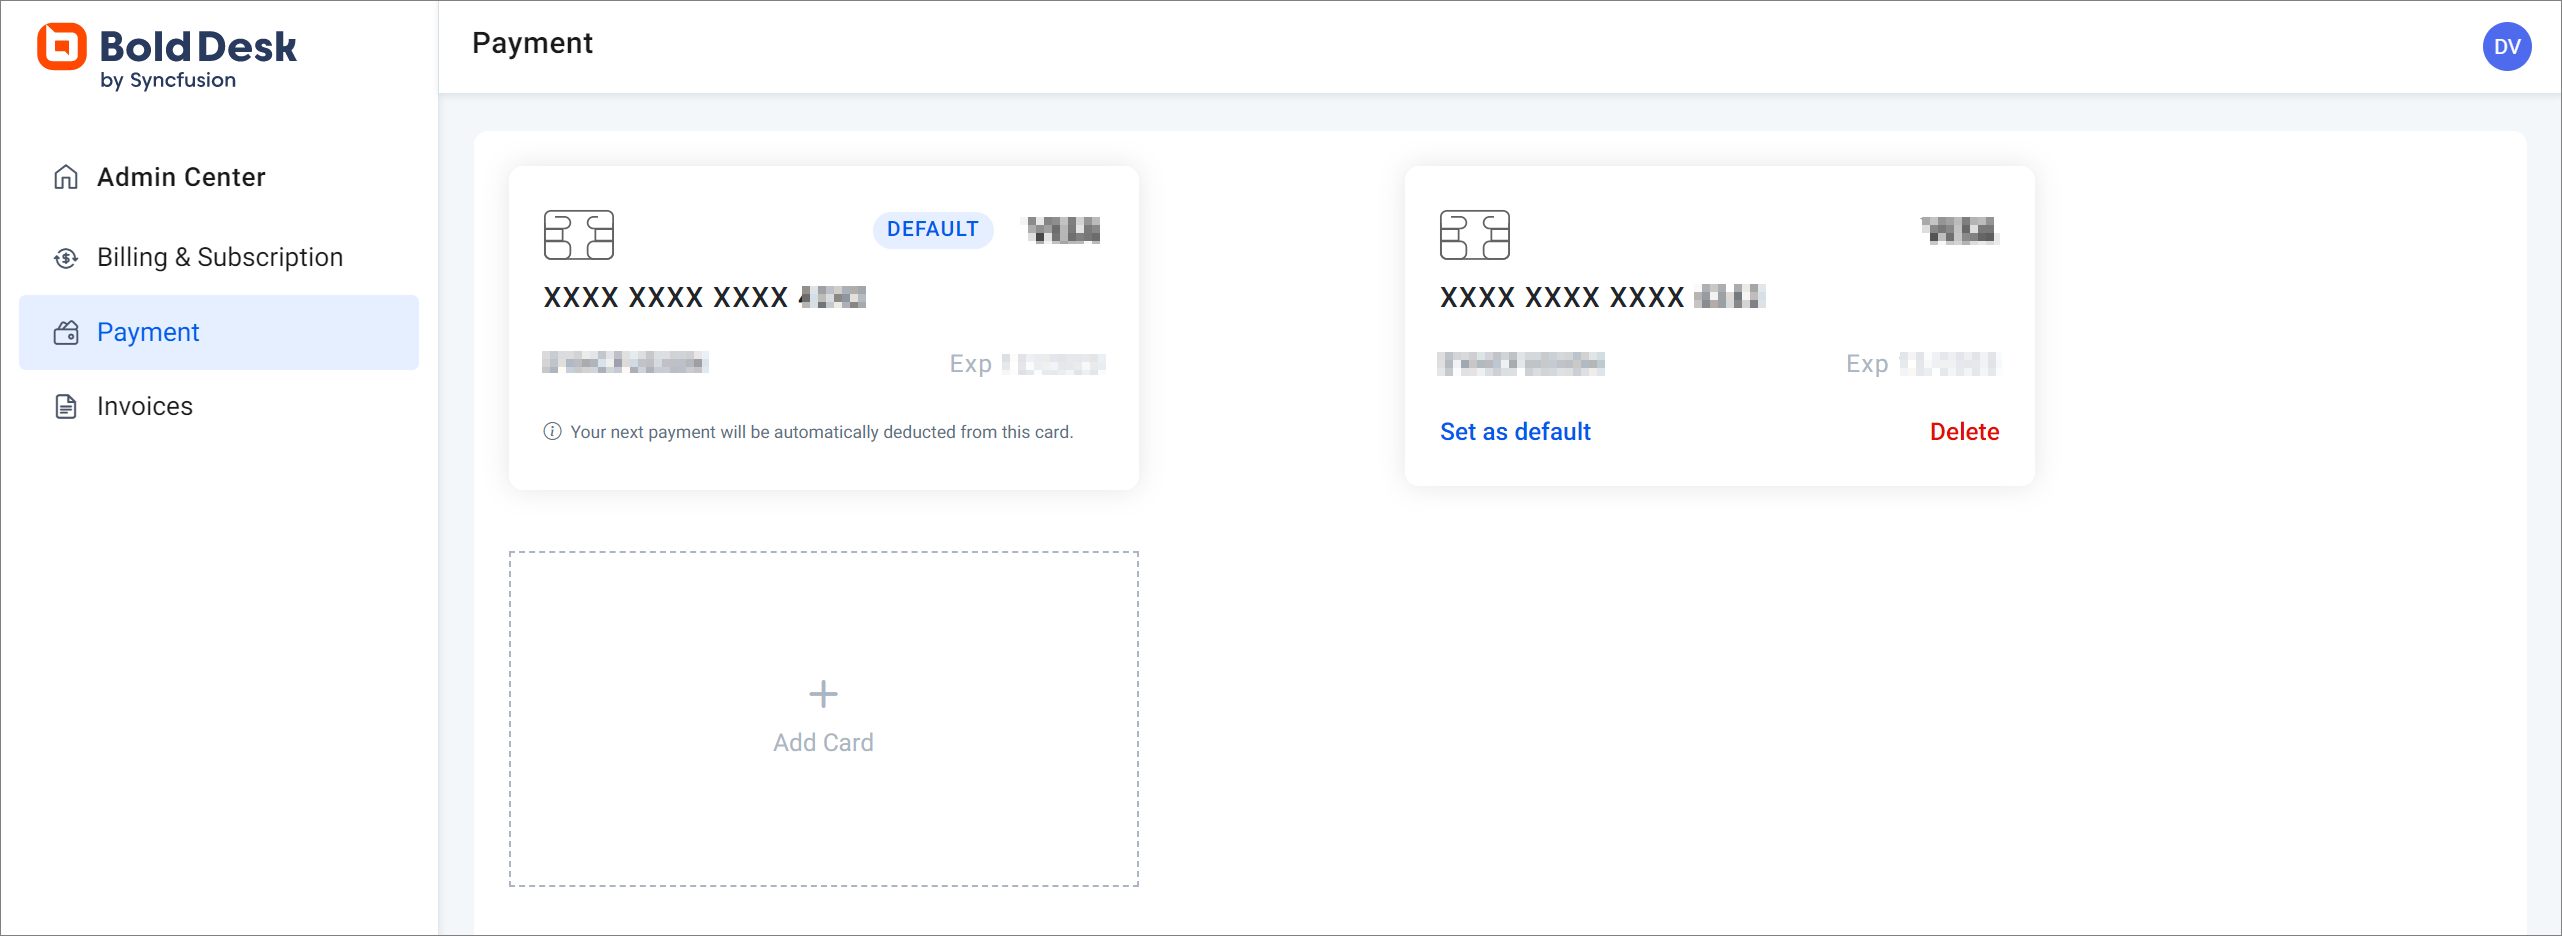 New Payment Details